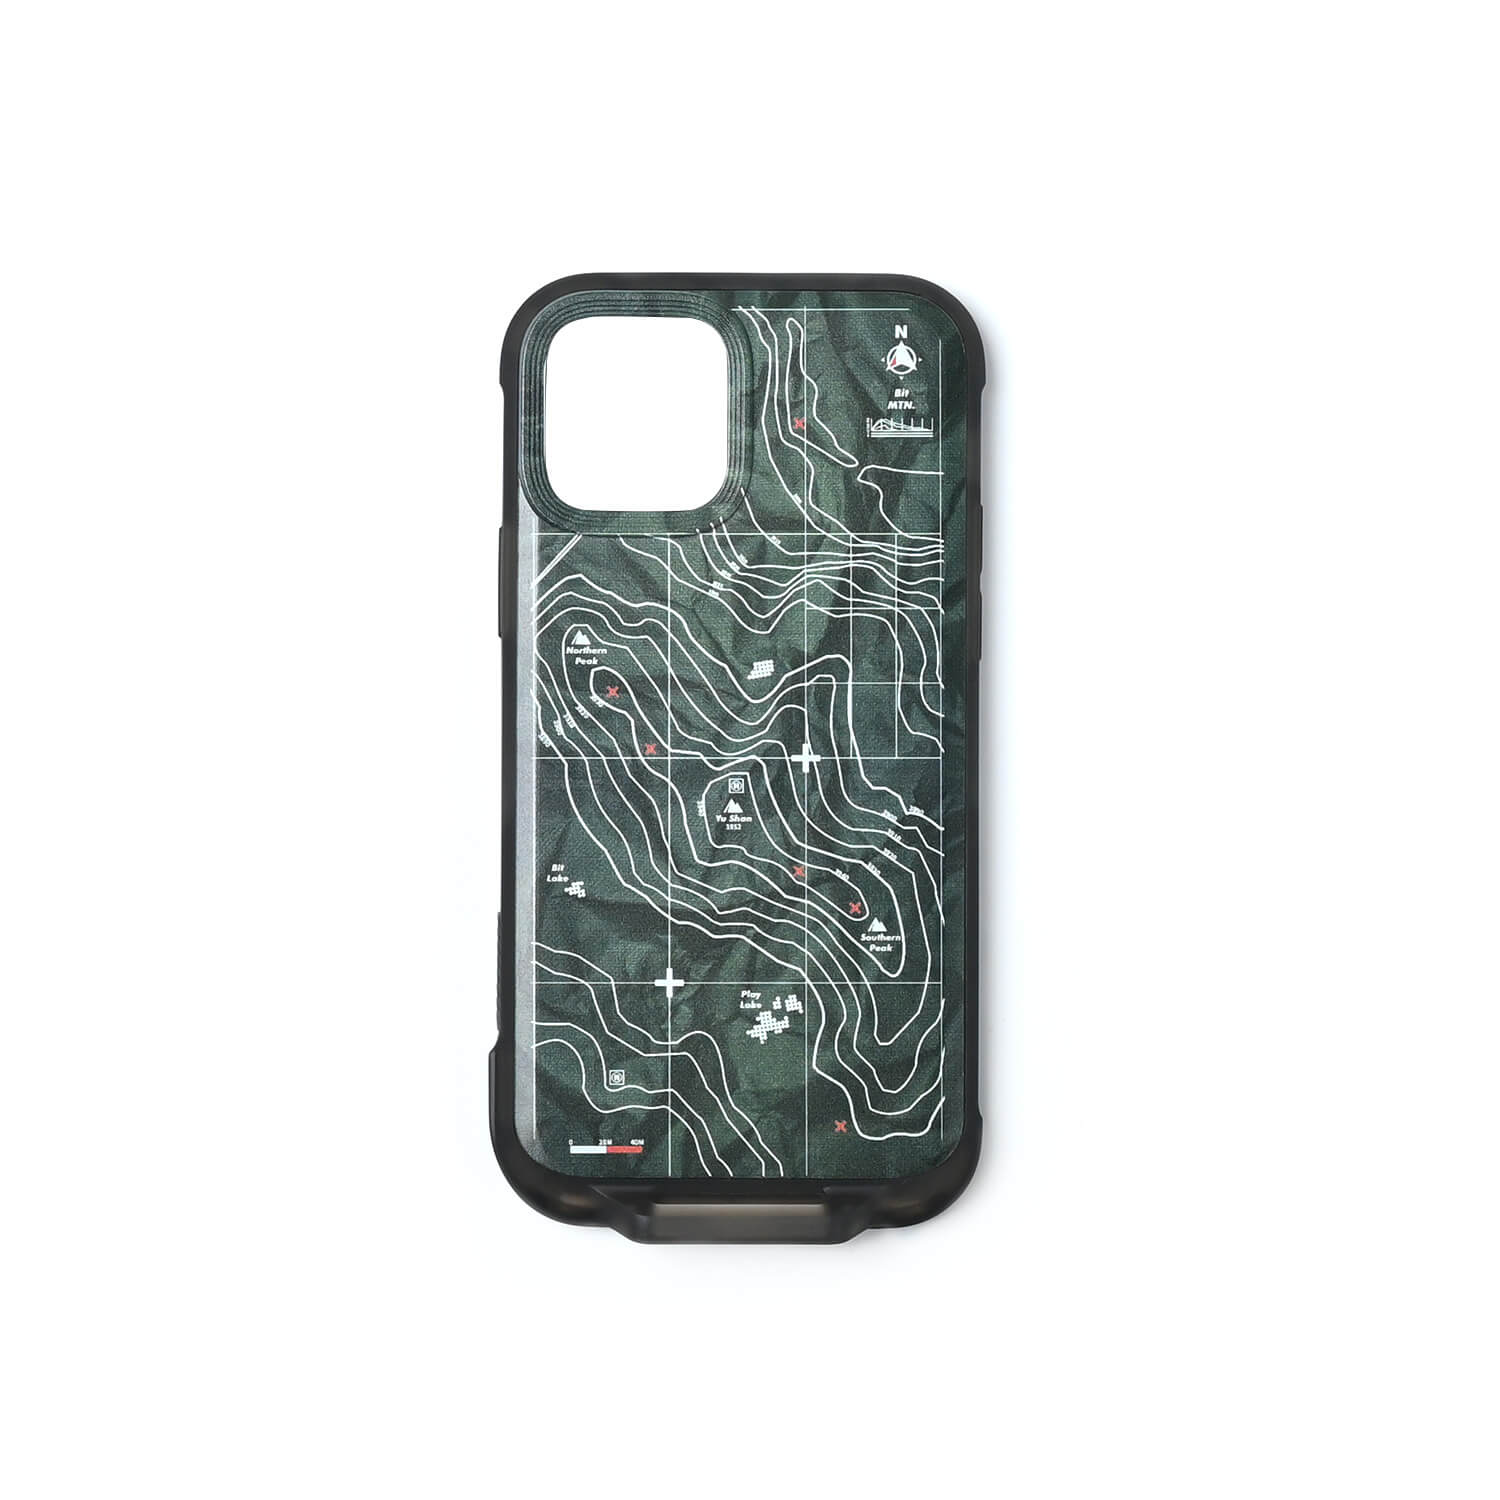 Wander Case for iPhone 12 Series - Black